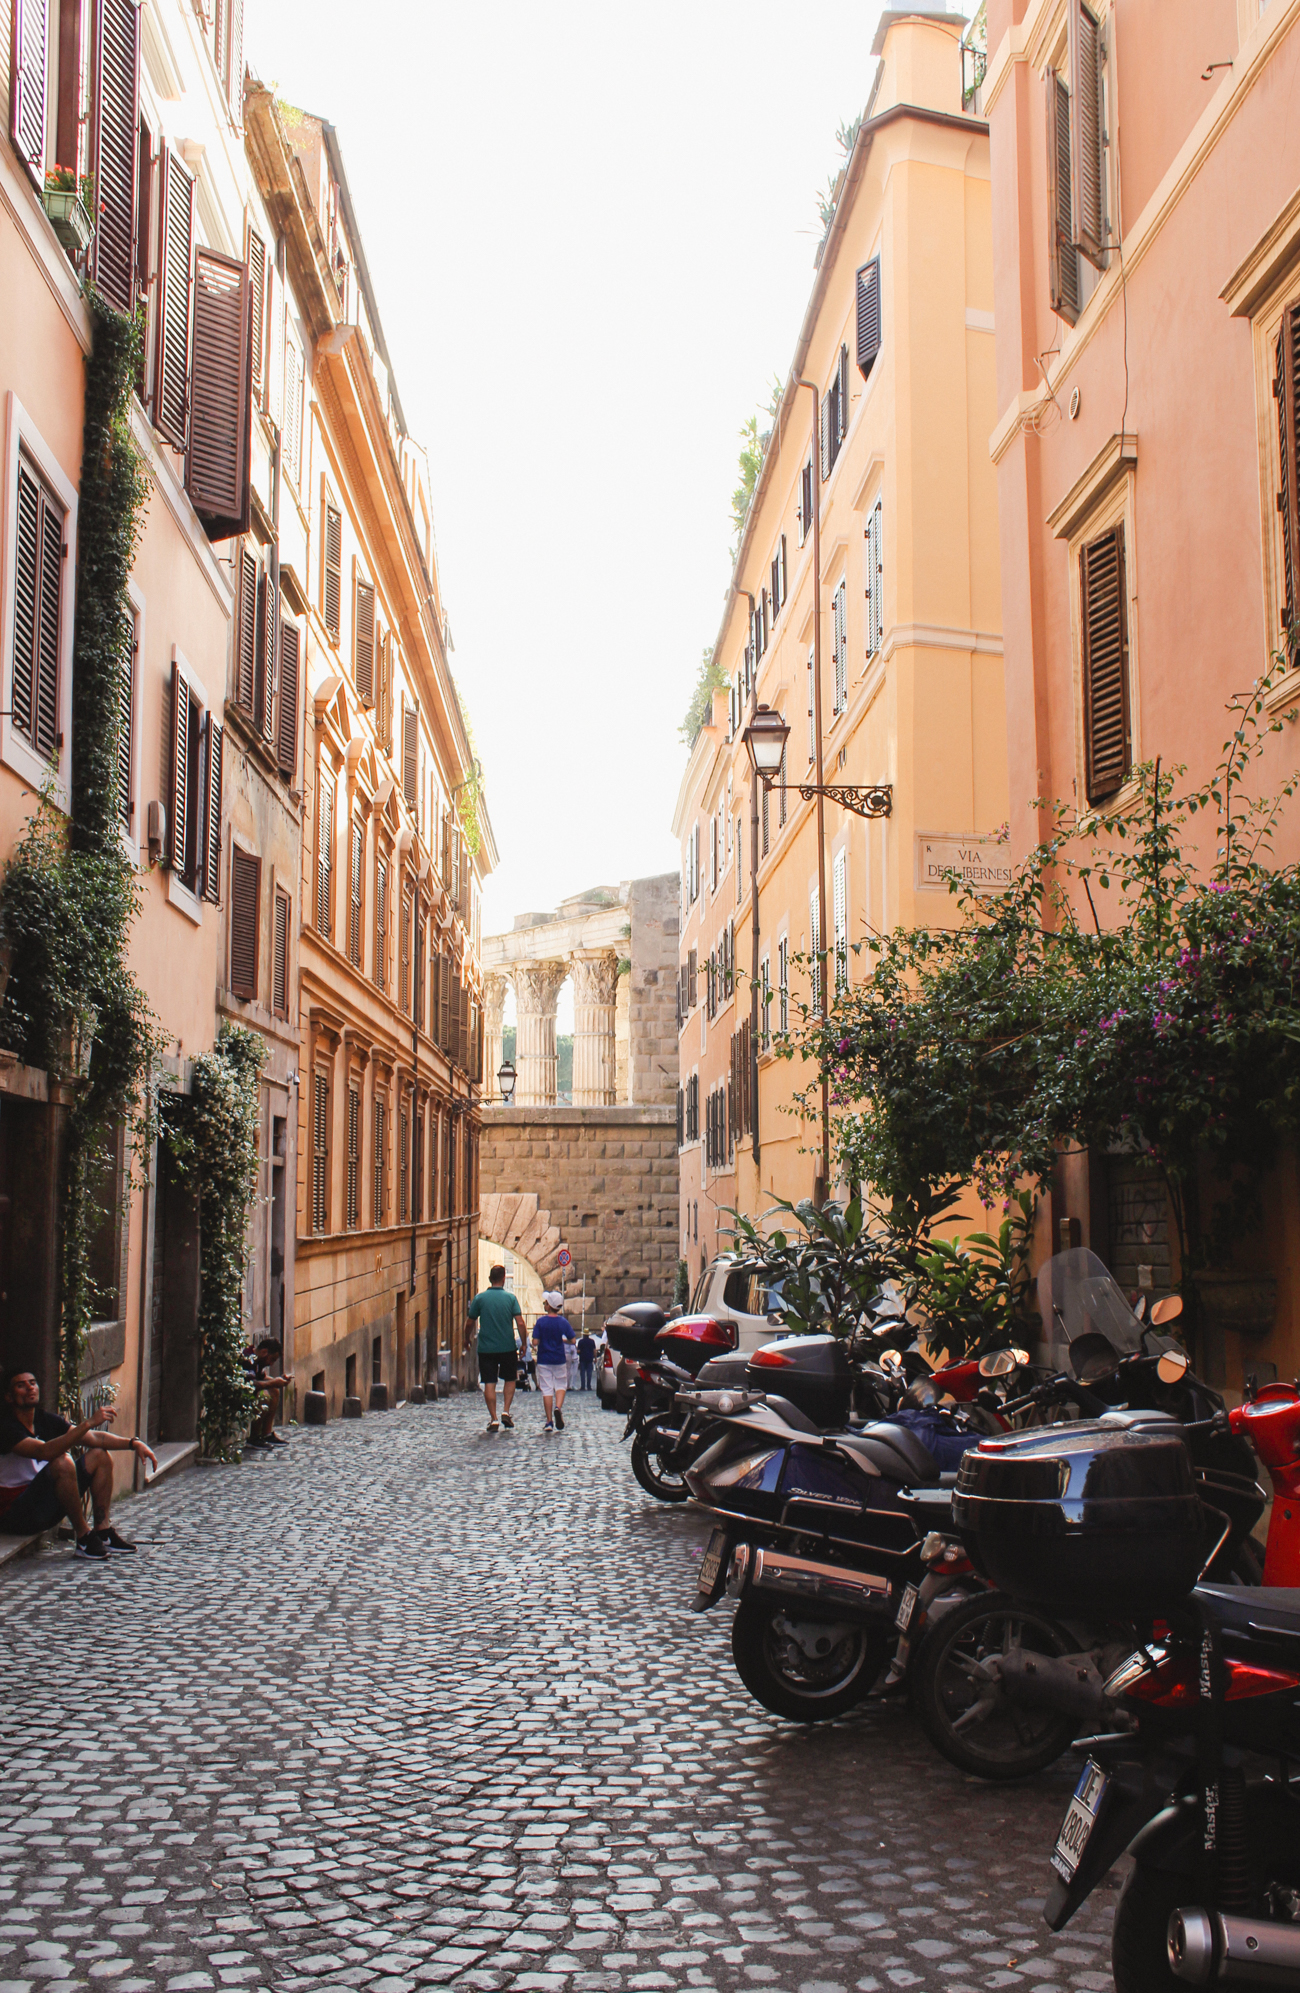 25 things you must do in Rome, Italy